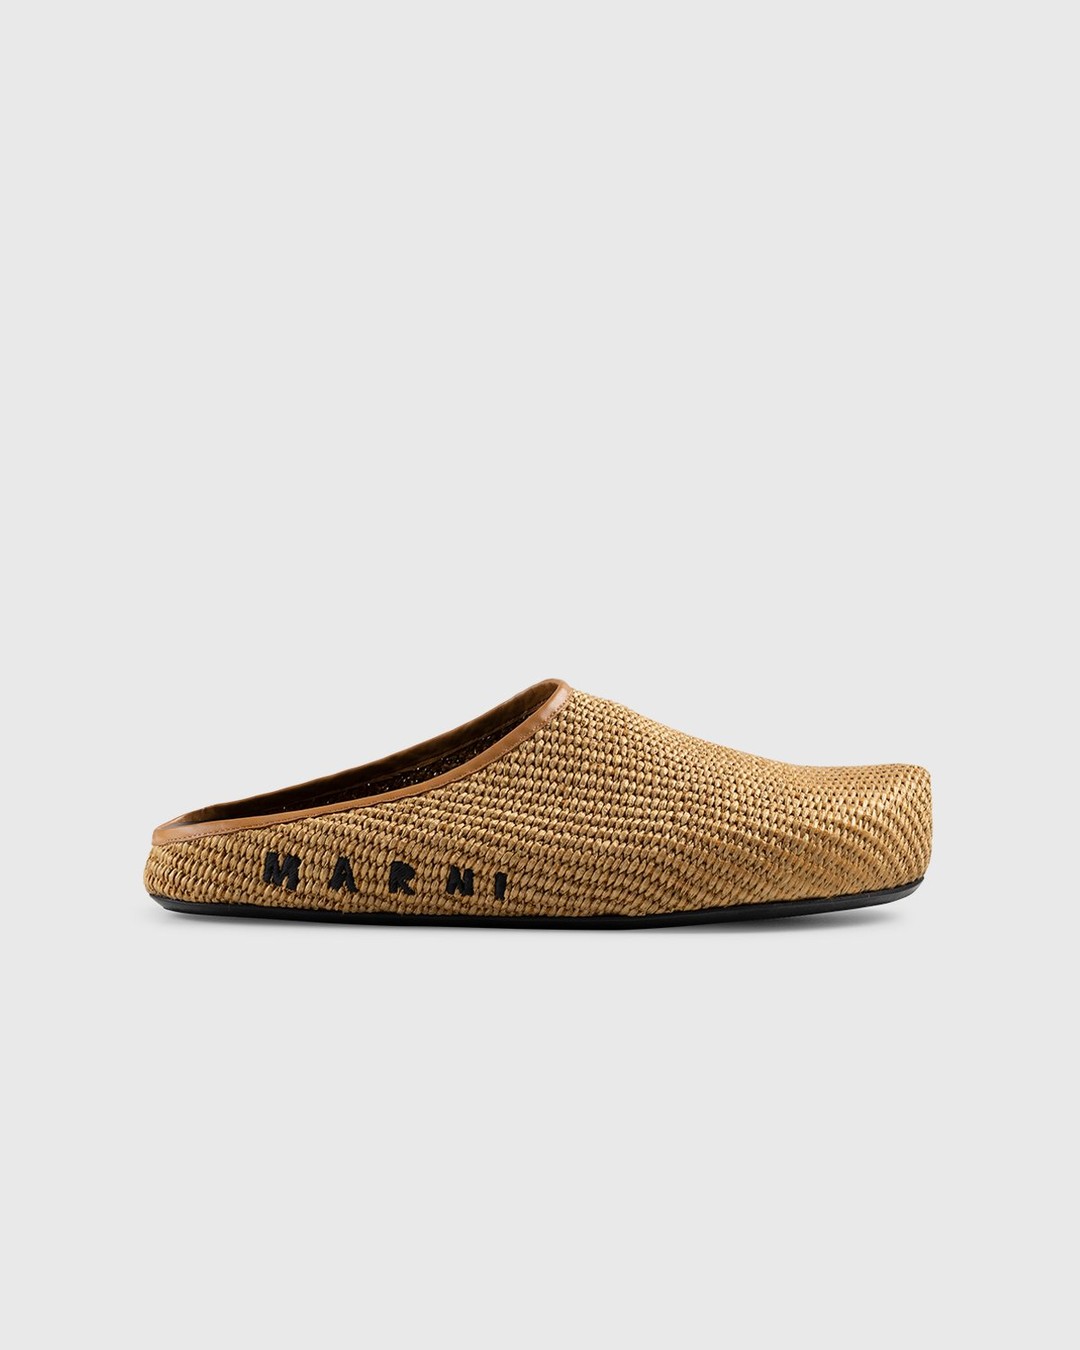 Marni – Woven Raffia and Leather Mules Brown/Black - Mules - Brown - Image 1